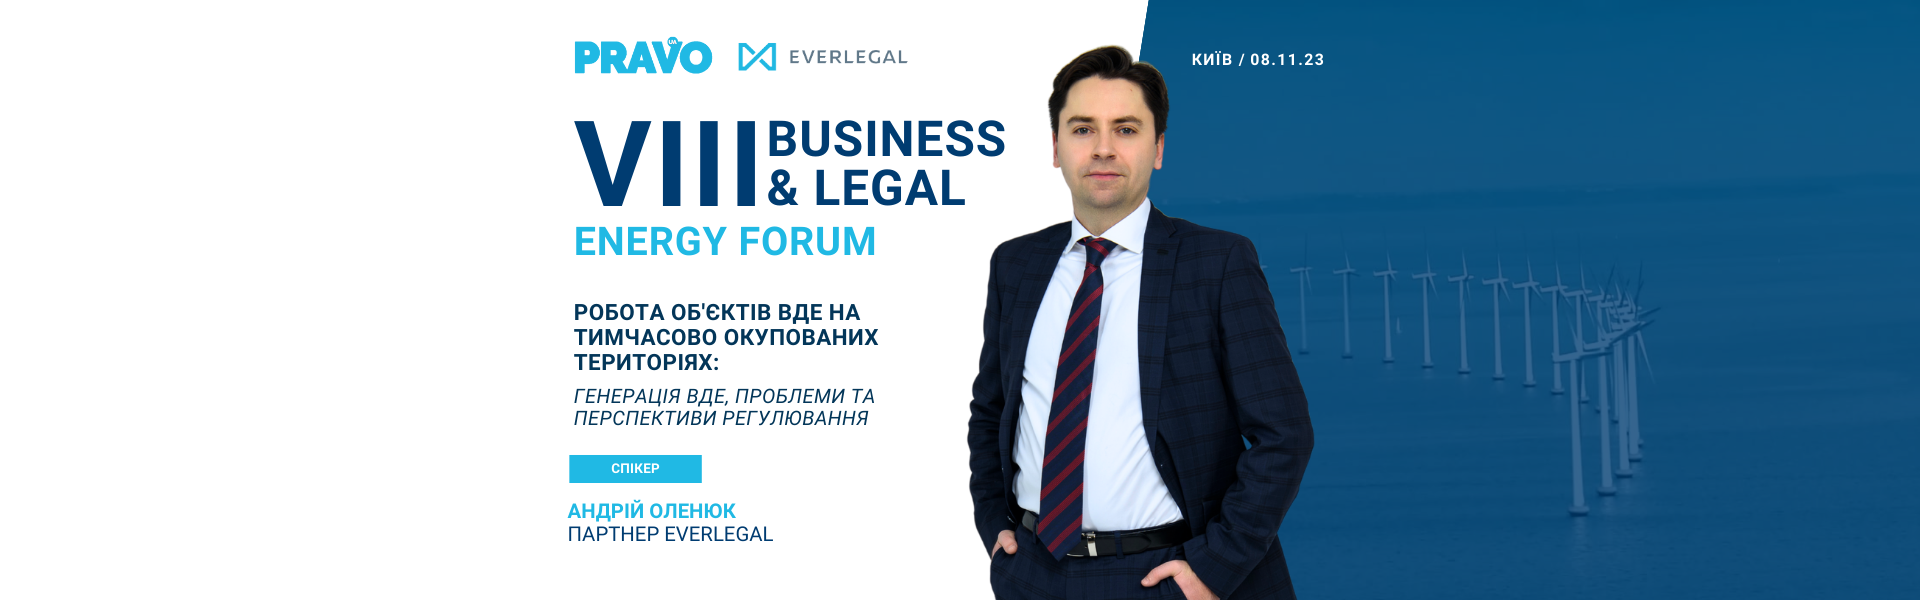 Welcome to the VIII BUSINESS & LEGAL ENERGY FORUM